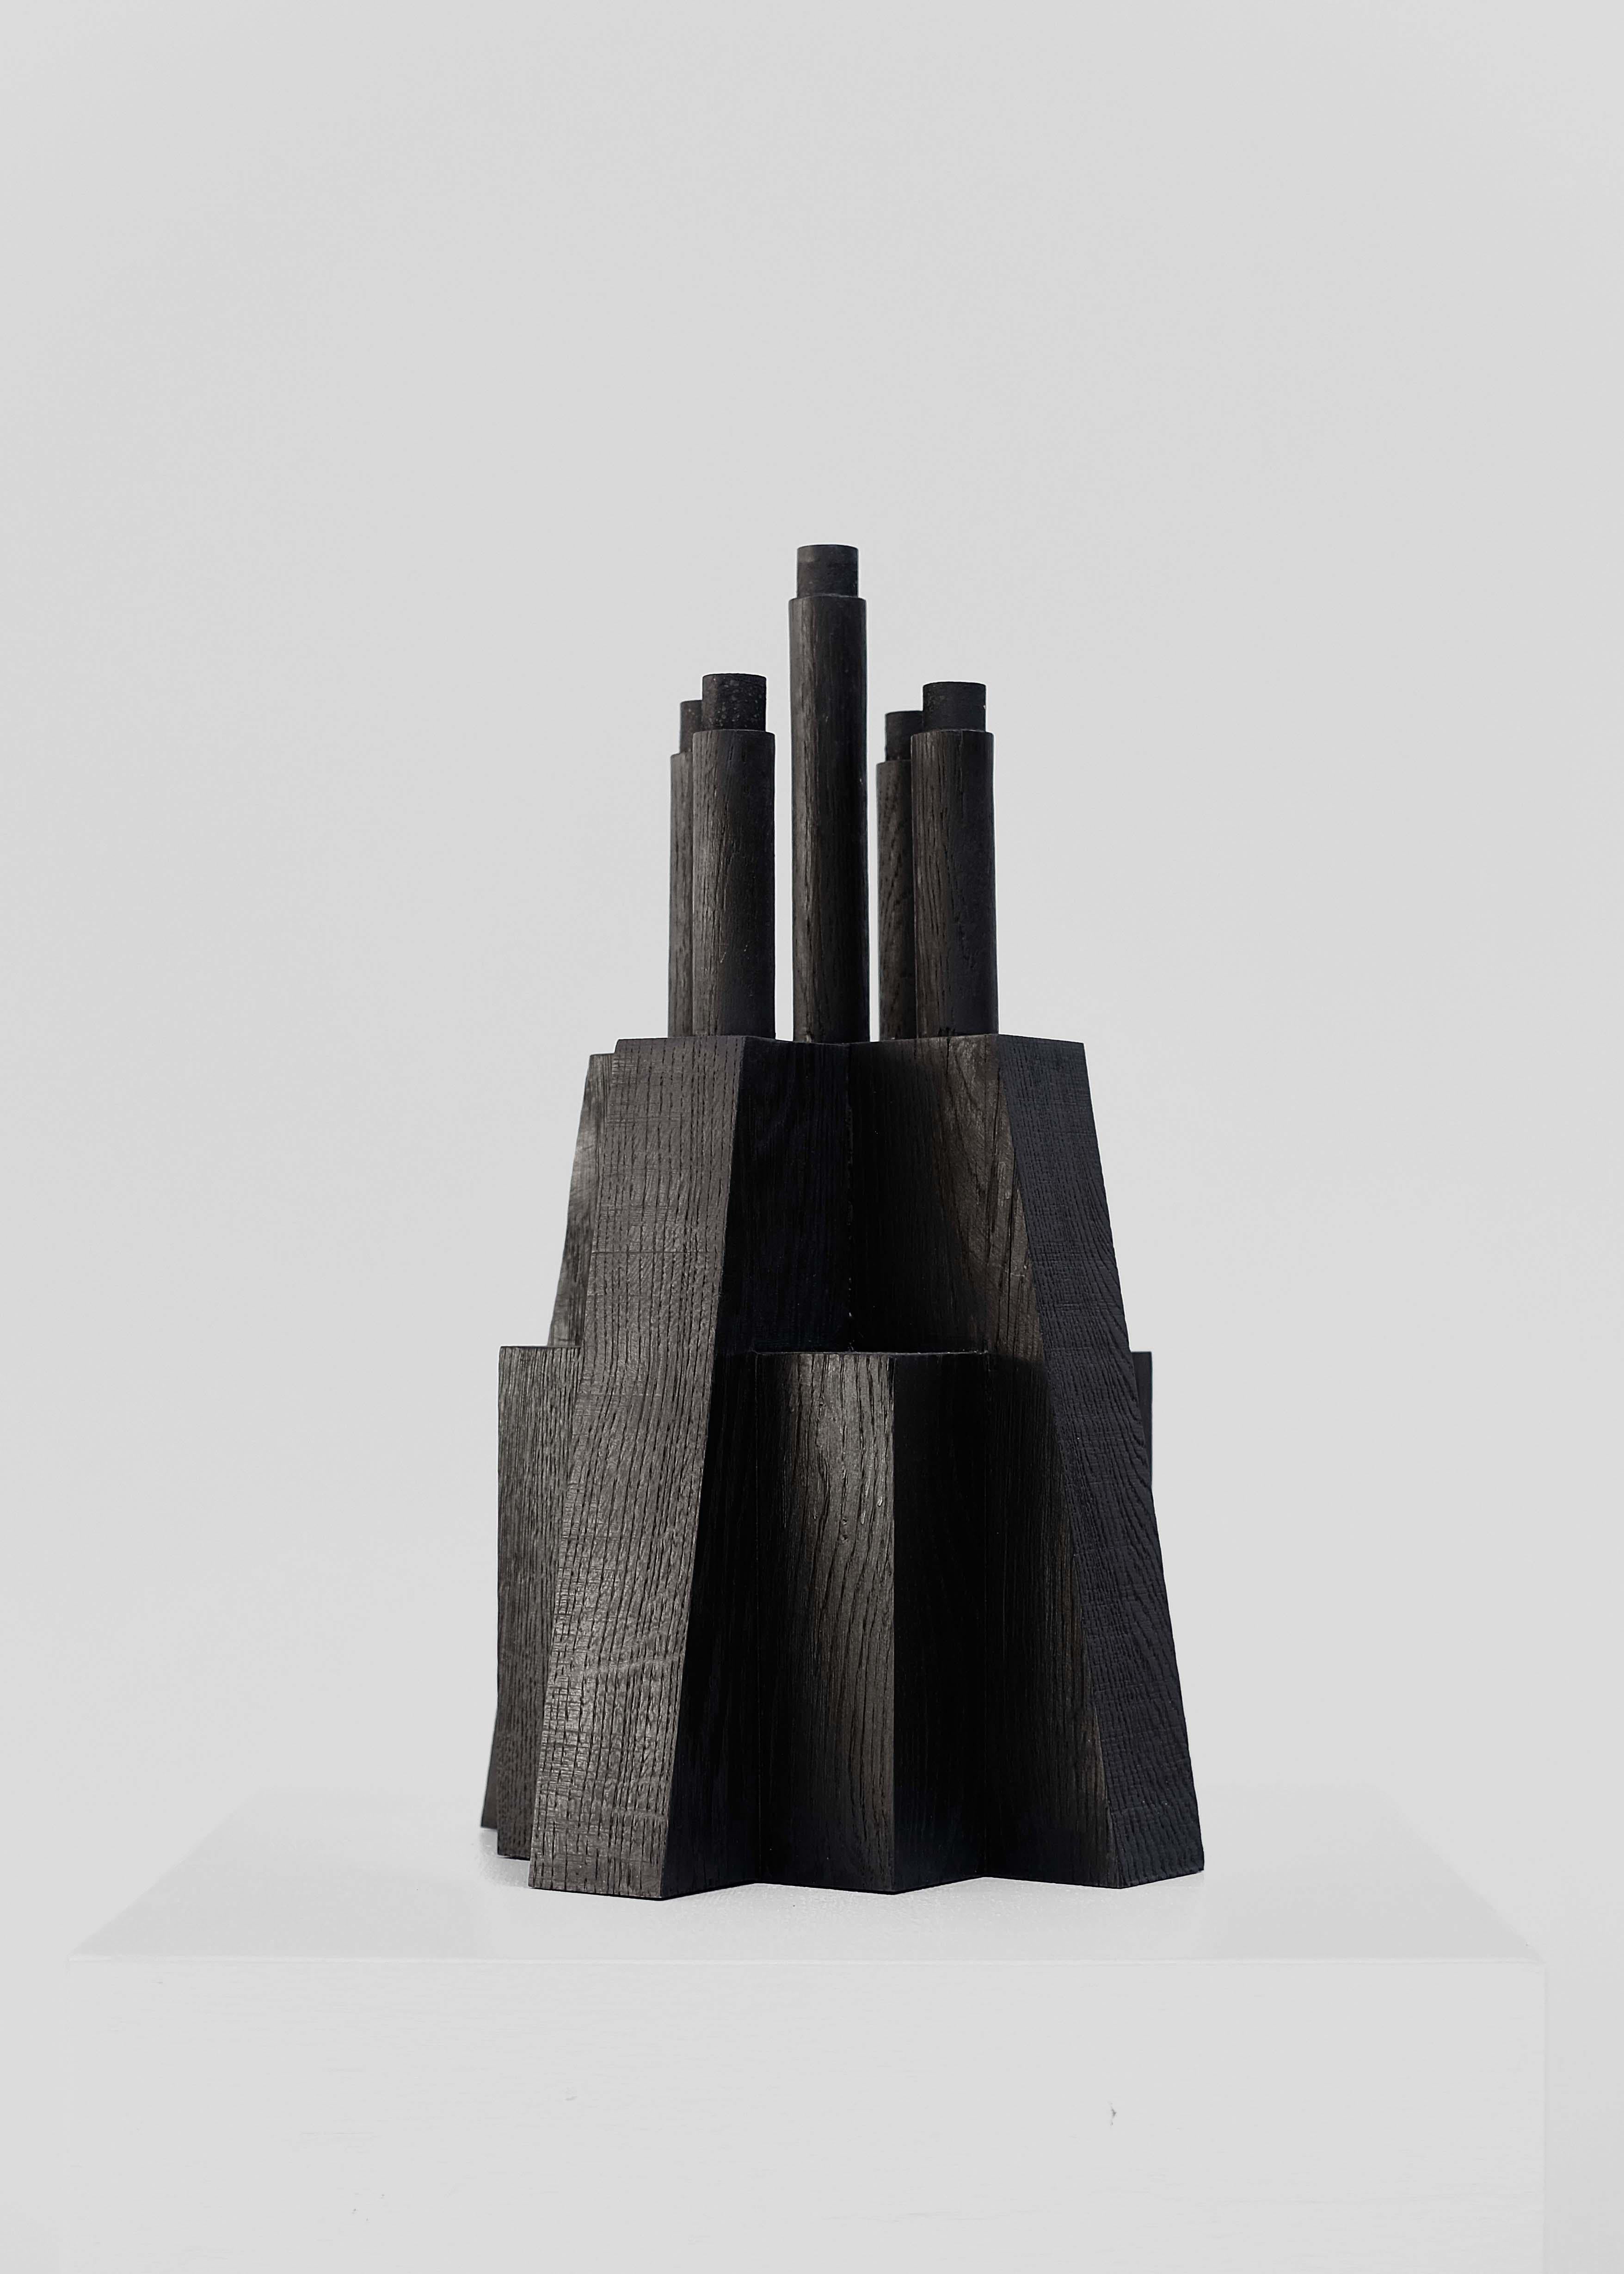 Collectible Bunker Candleholder 4